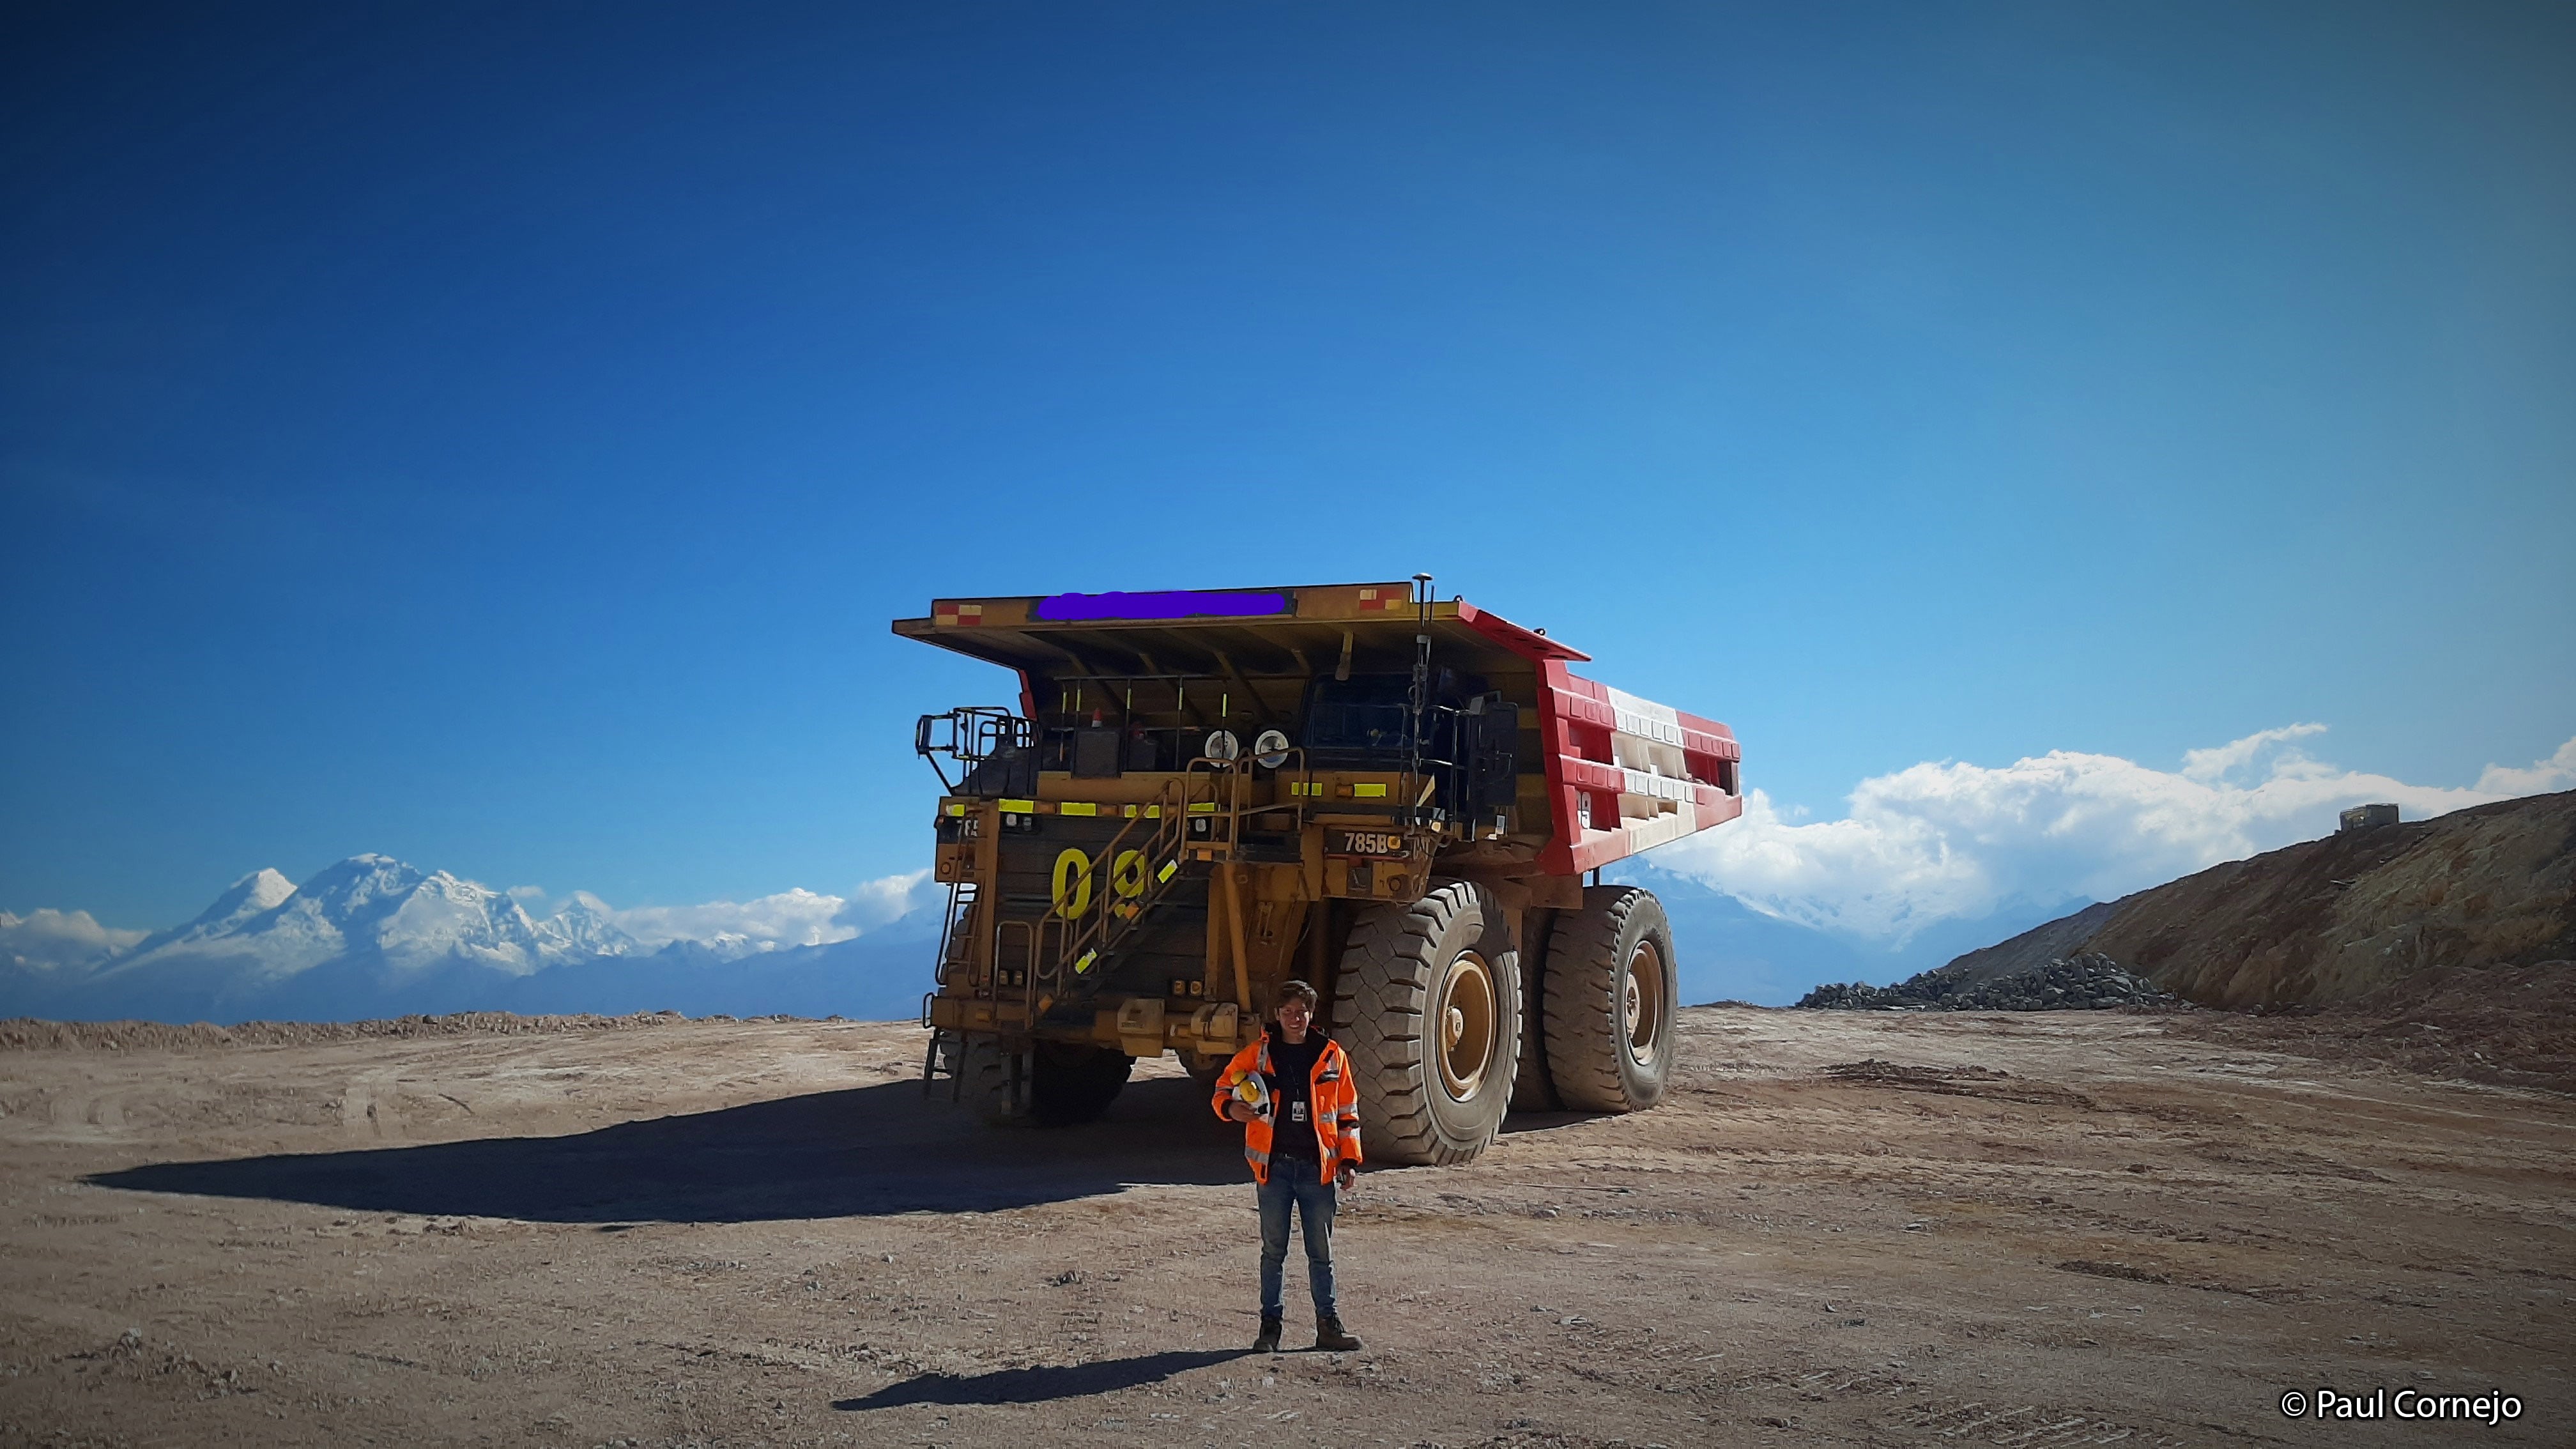 Honorable mention photo by Paul Cornejo: Mine worker in orange safety jacket in front of a mining dump truck